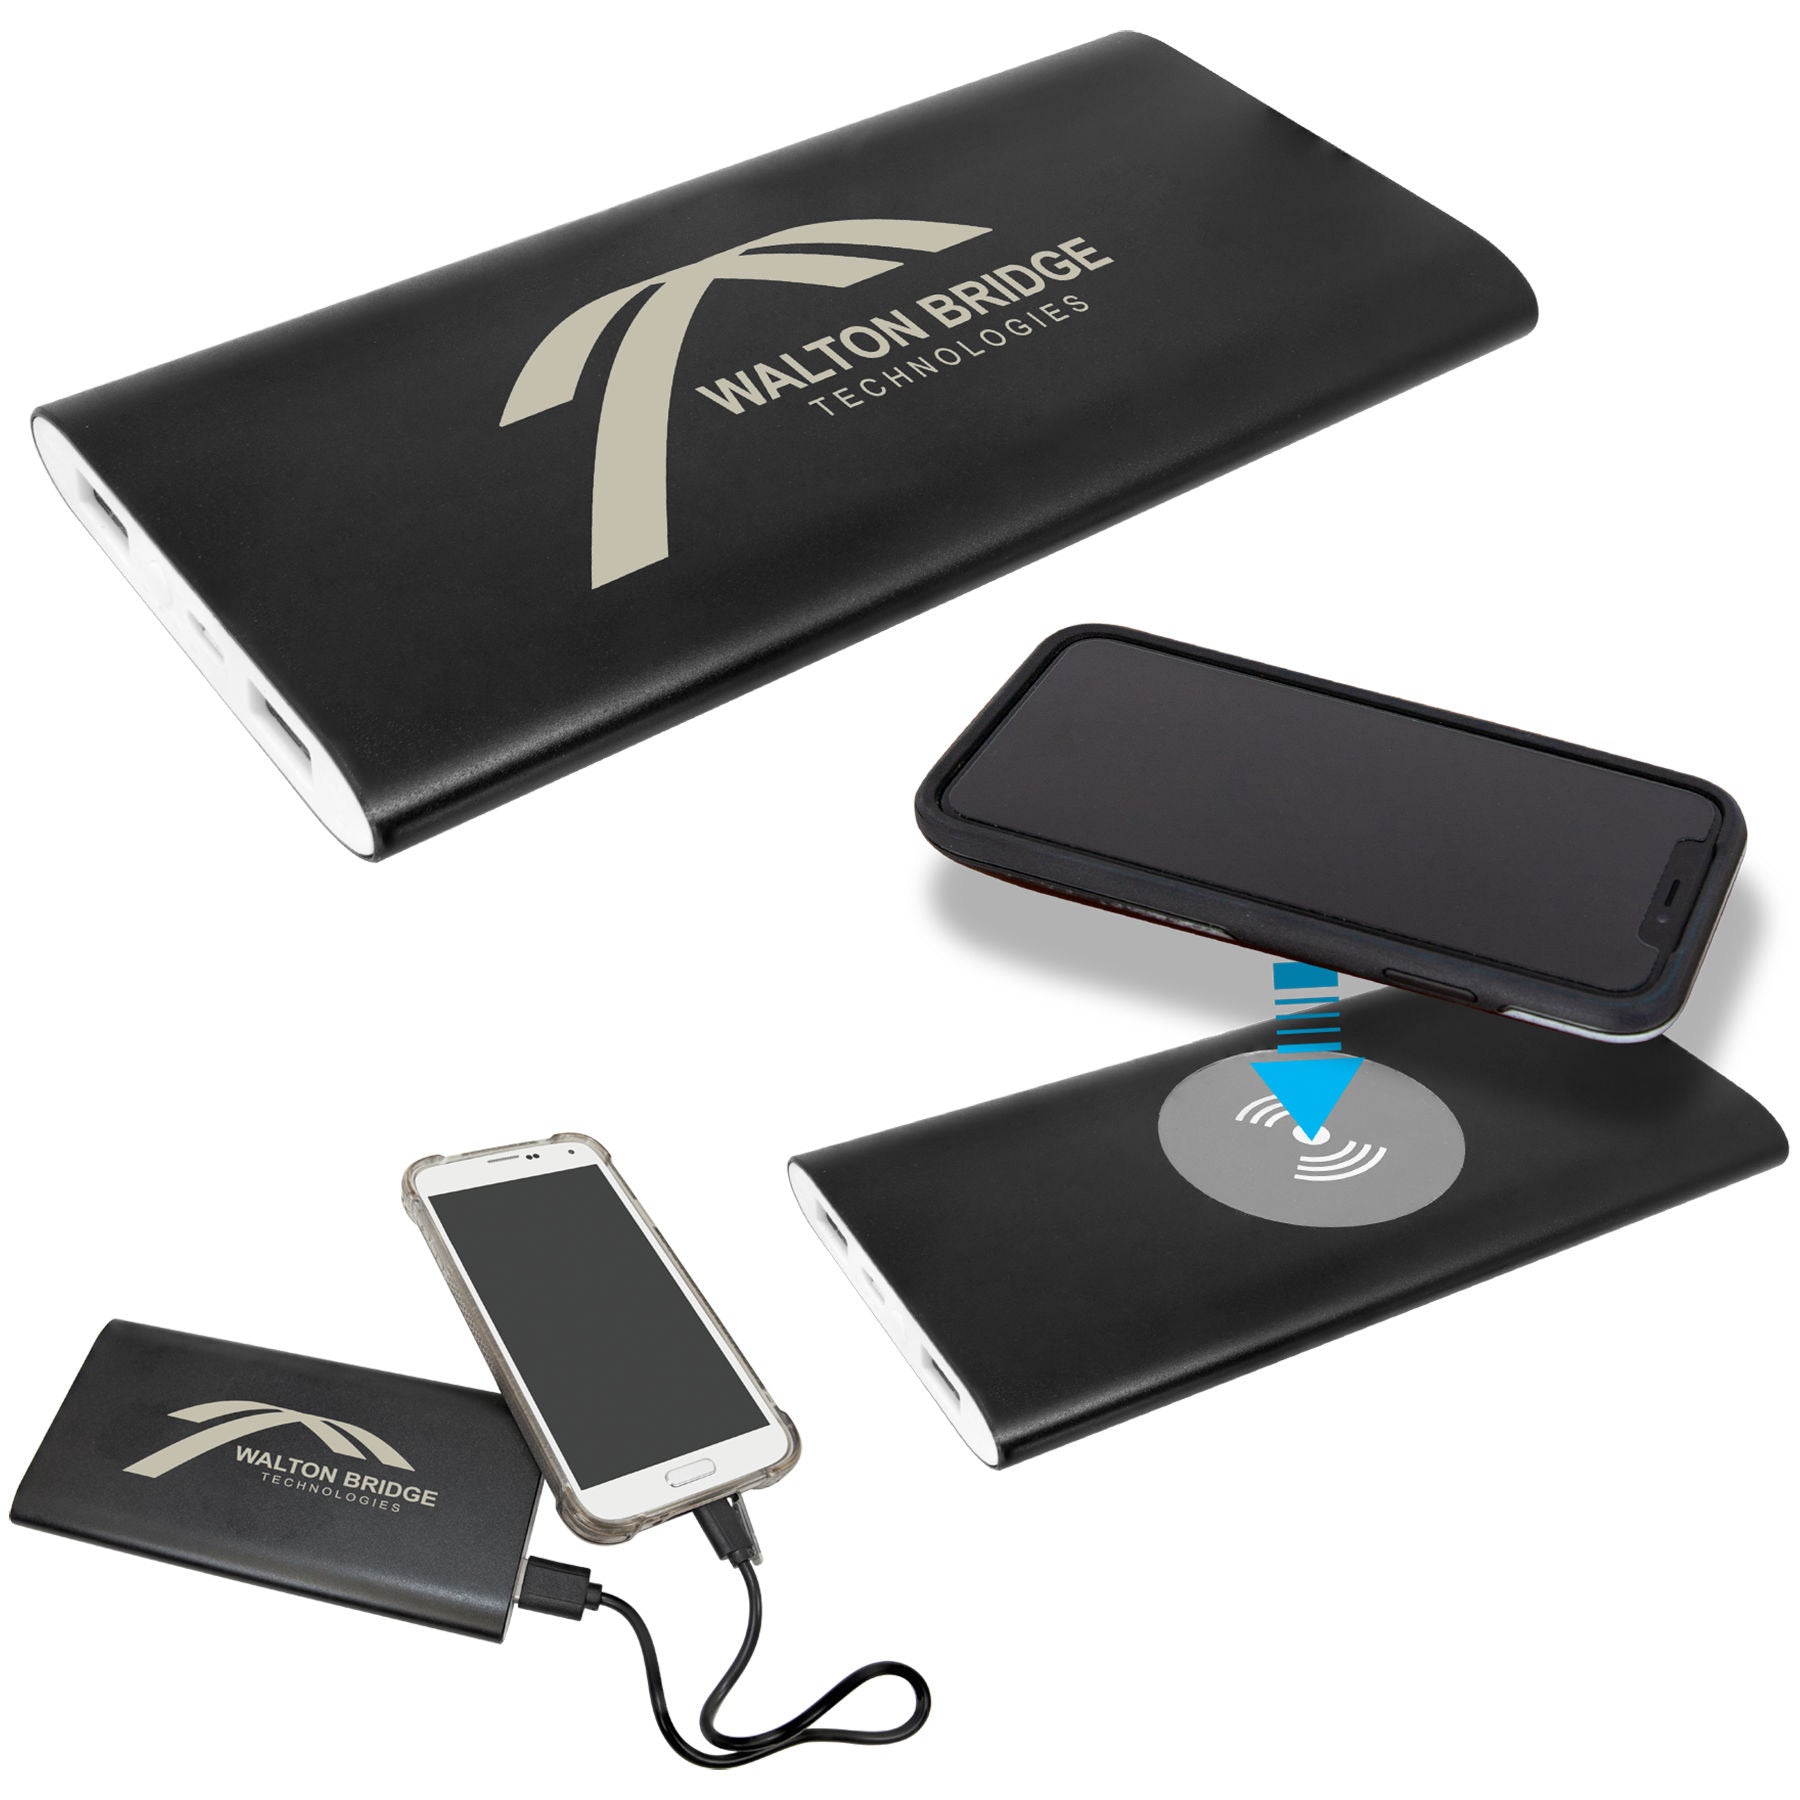 Wireless anodized power bank and aluminum charger set